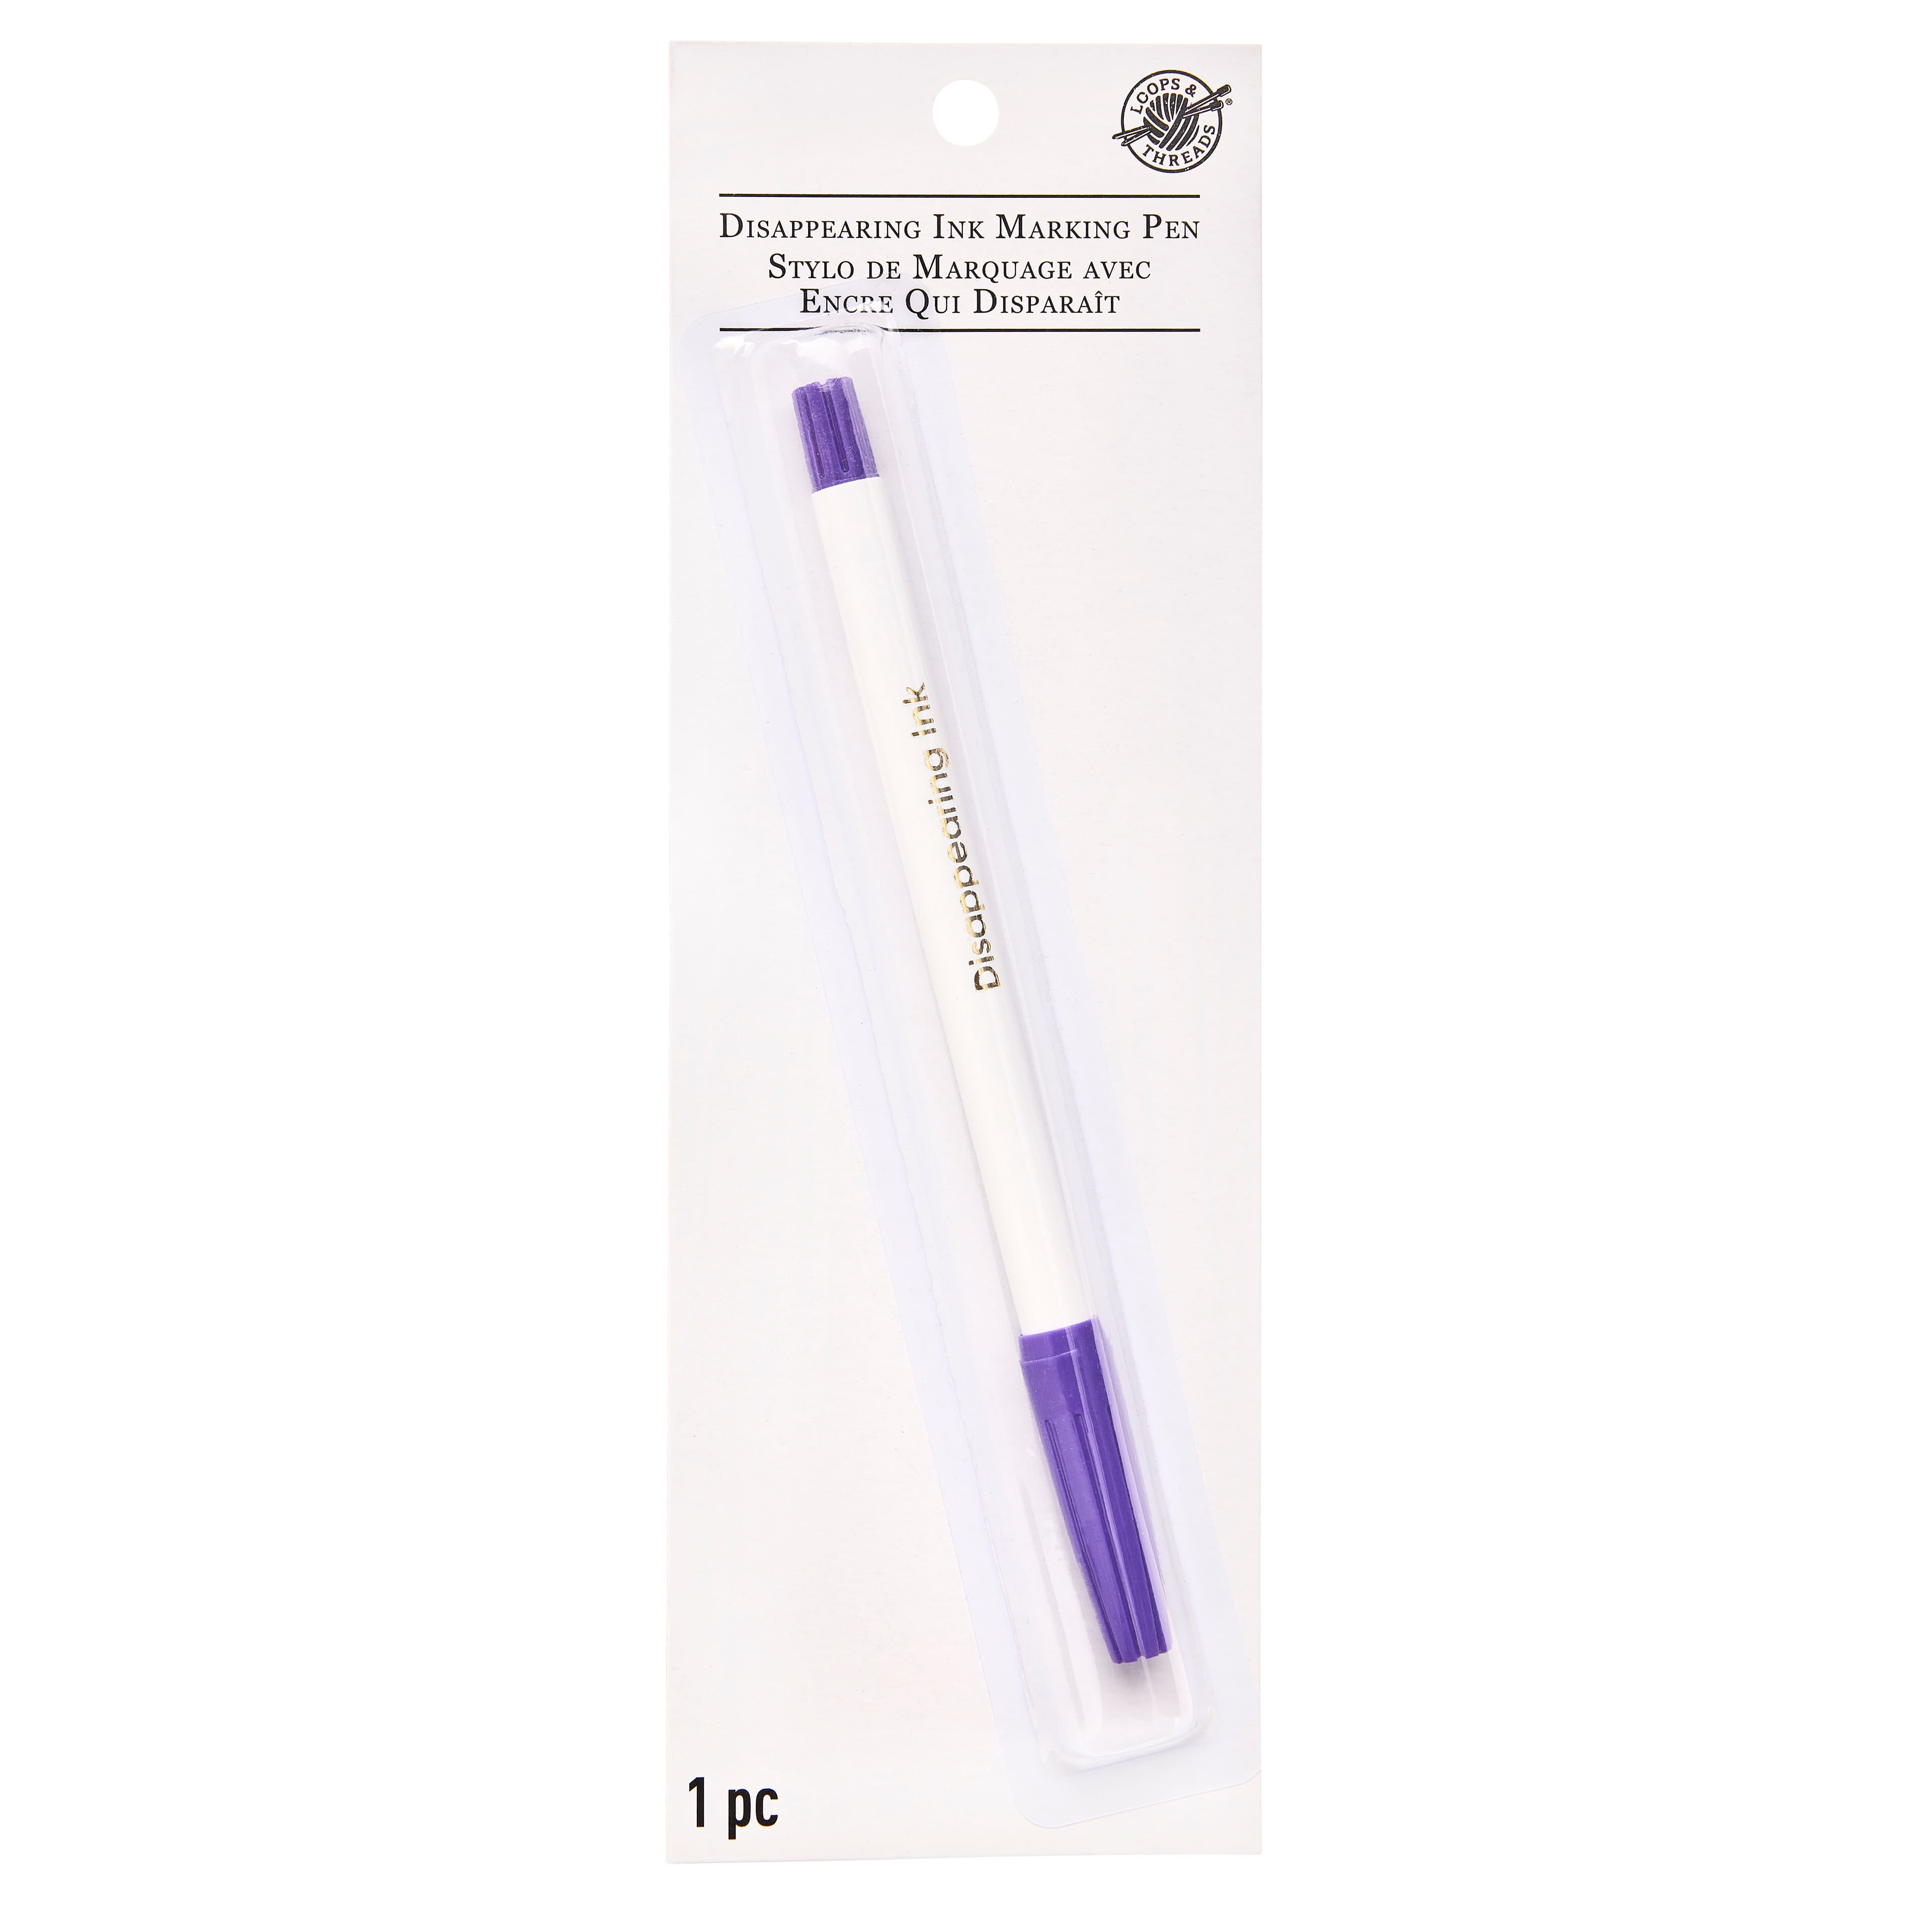 Dritz Disappearing Ink Marking Pen Pink